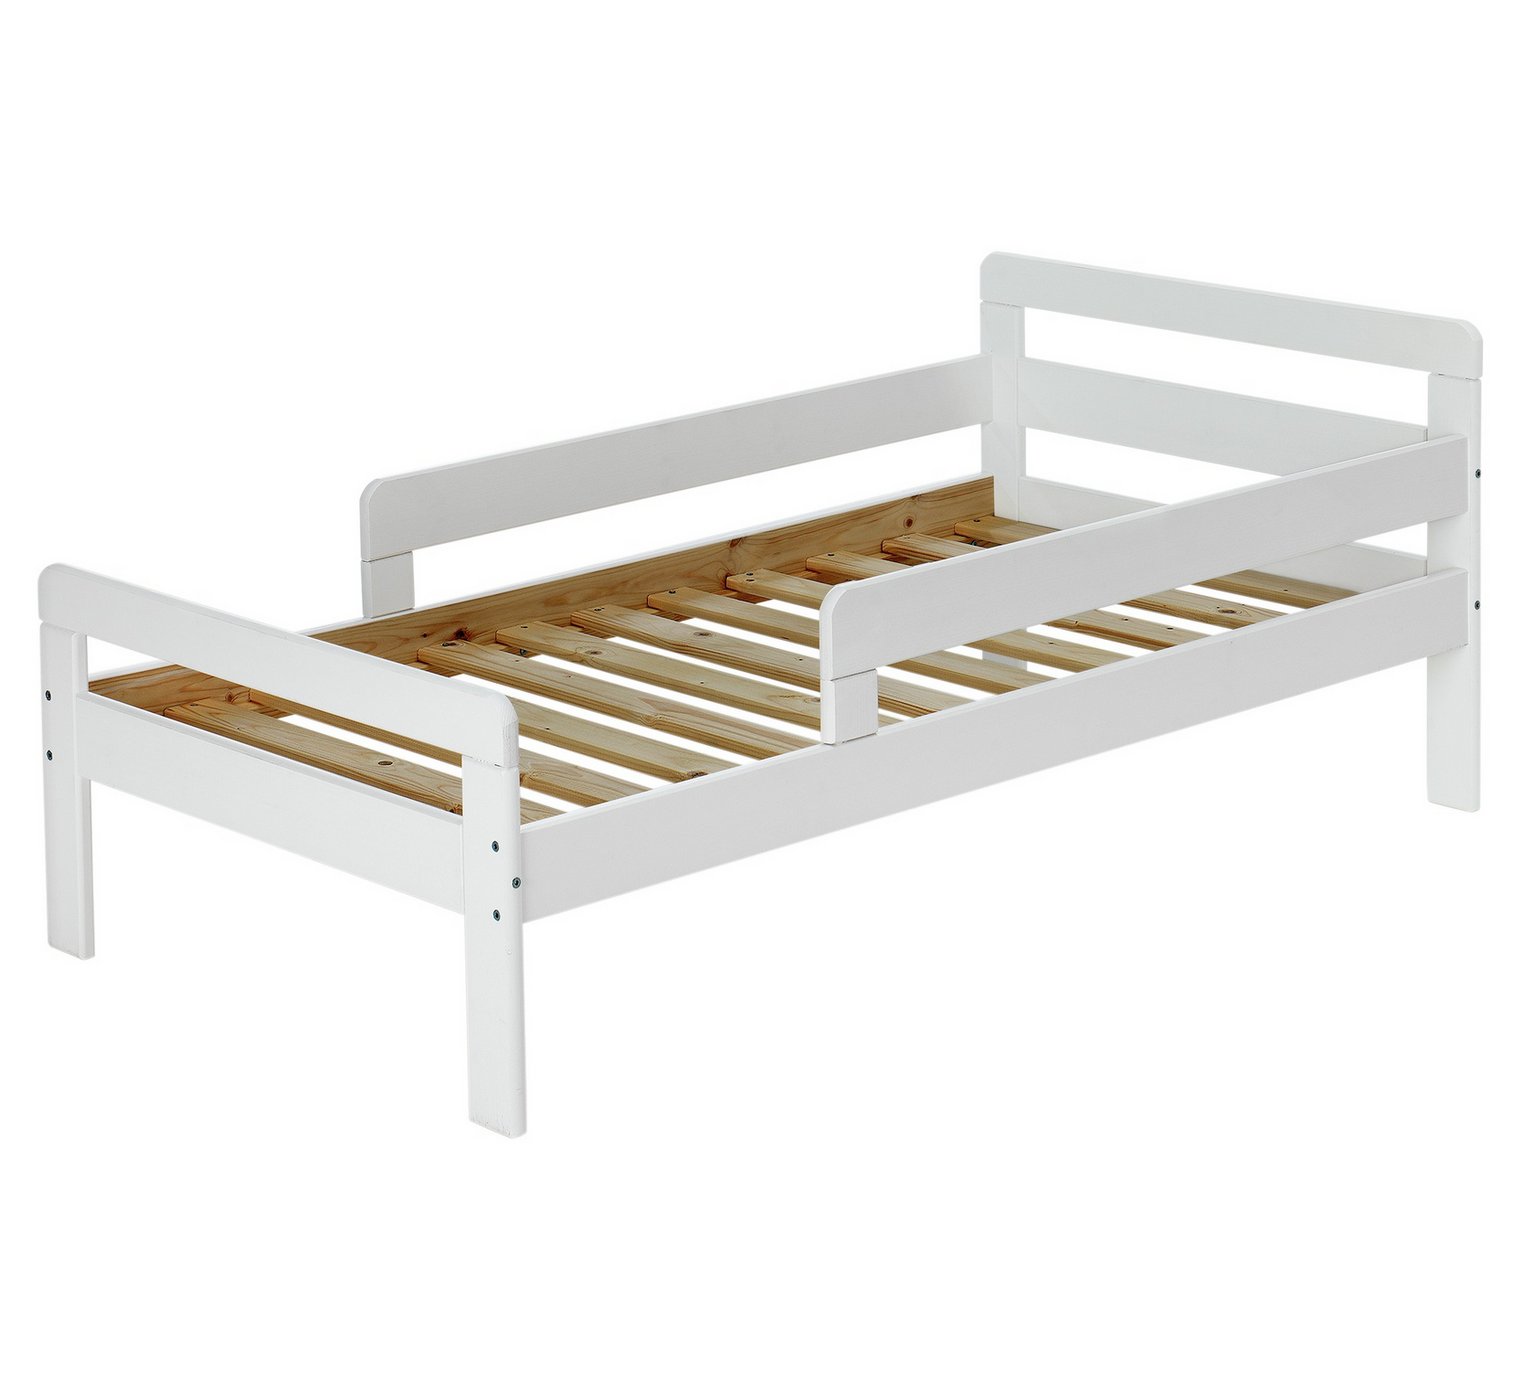 White Toddler Bed with Guard Rail in Wood